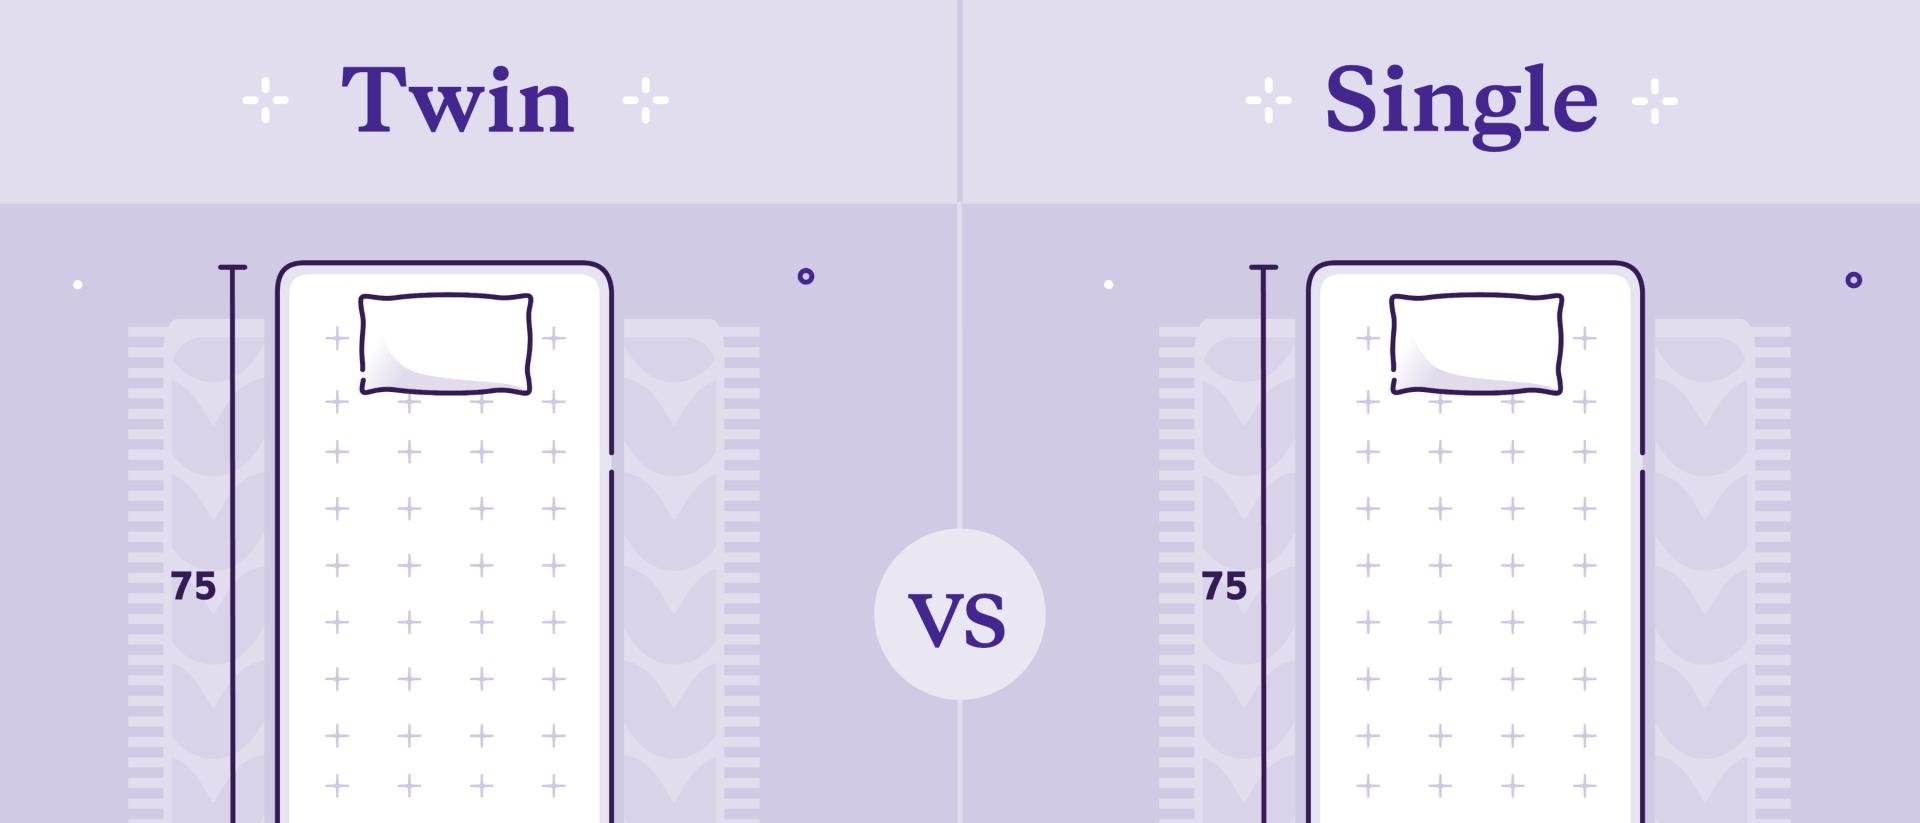 What's the Difference Between Twin XL and Standard Twin Bedding?